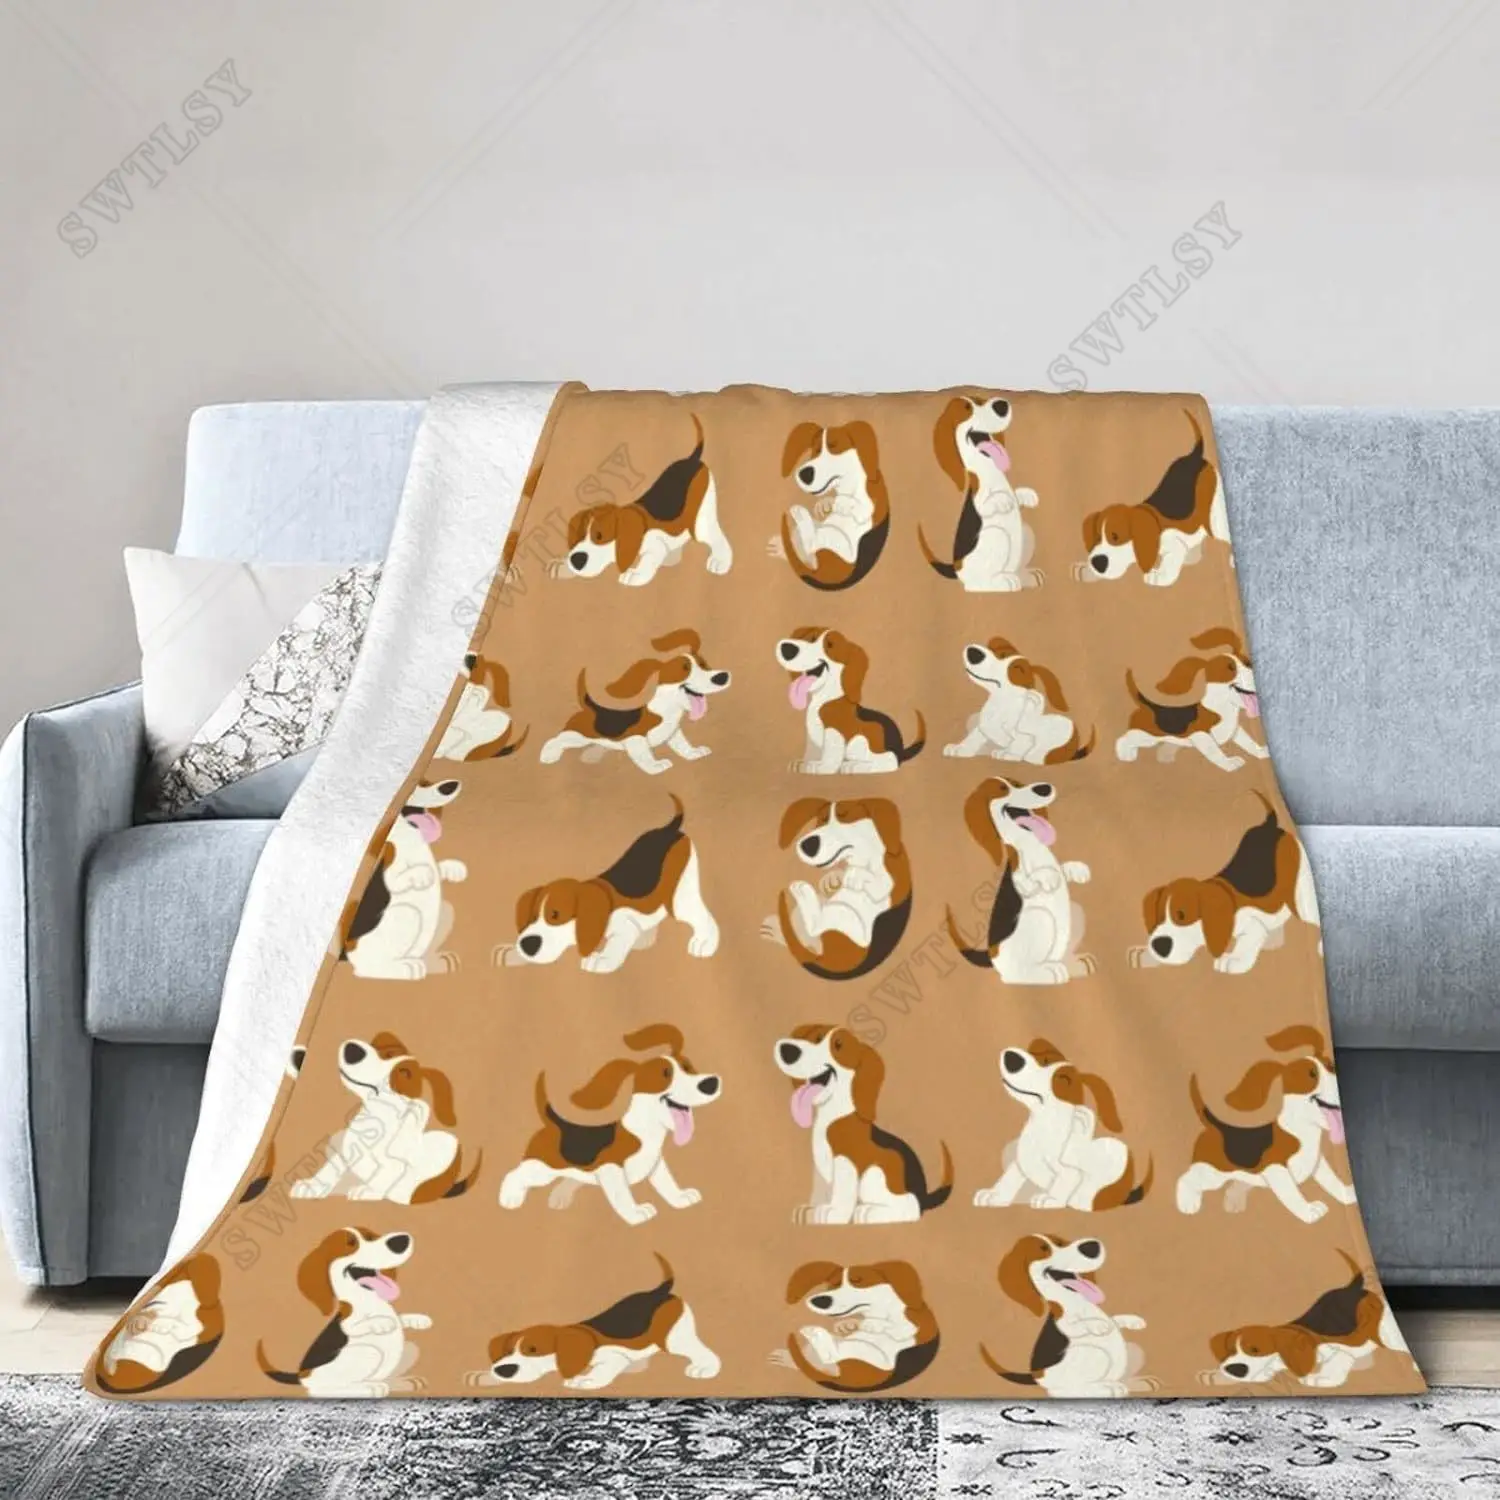 

Dog Cartoon Blanket Lightweight Cozy Fleece Throw Blankets Soft Warm Plush Print Blankets and Throws for Couch Sofa Bed Travel